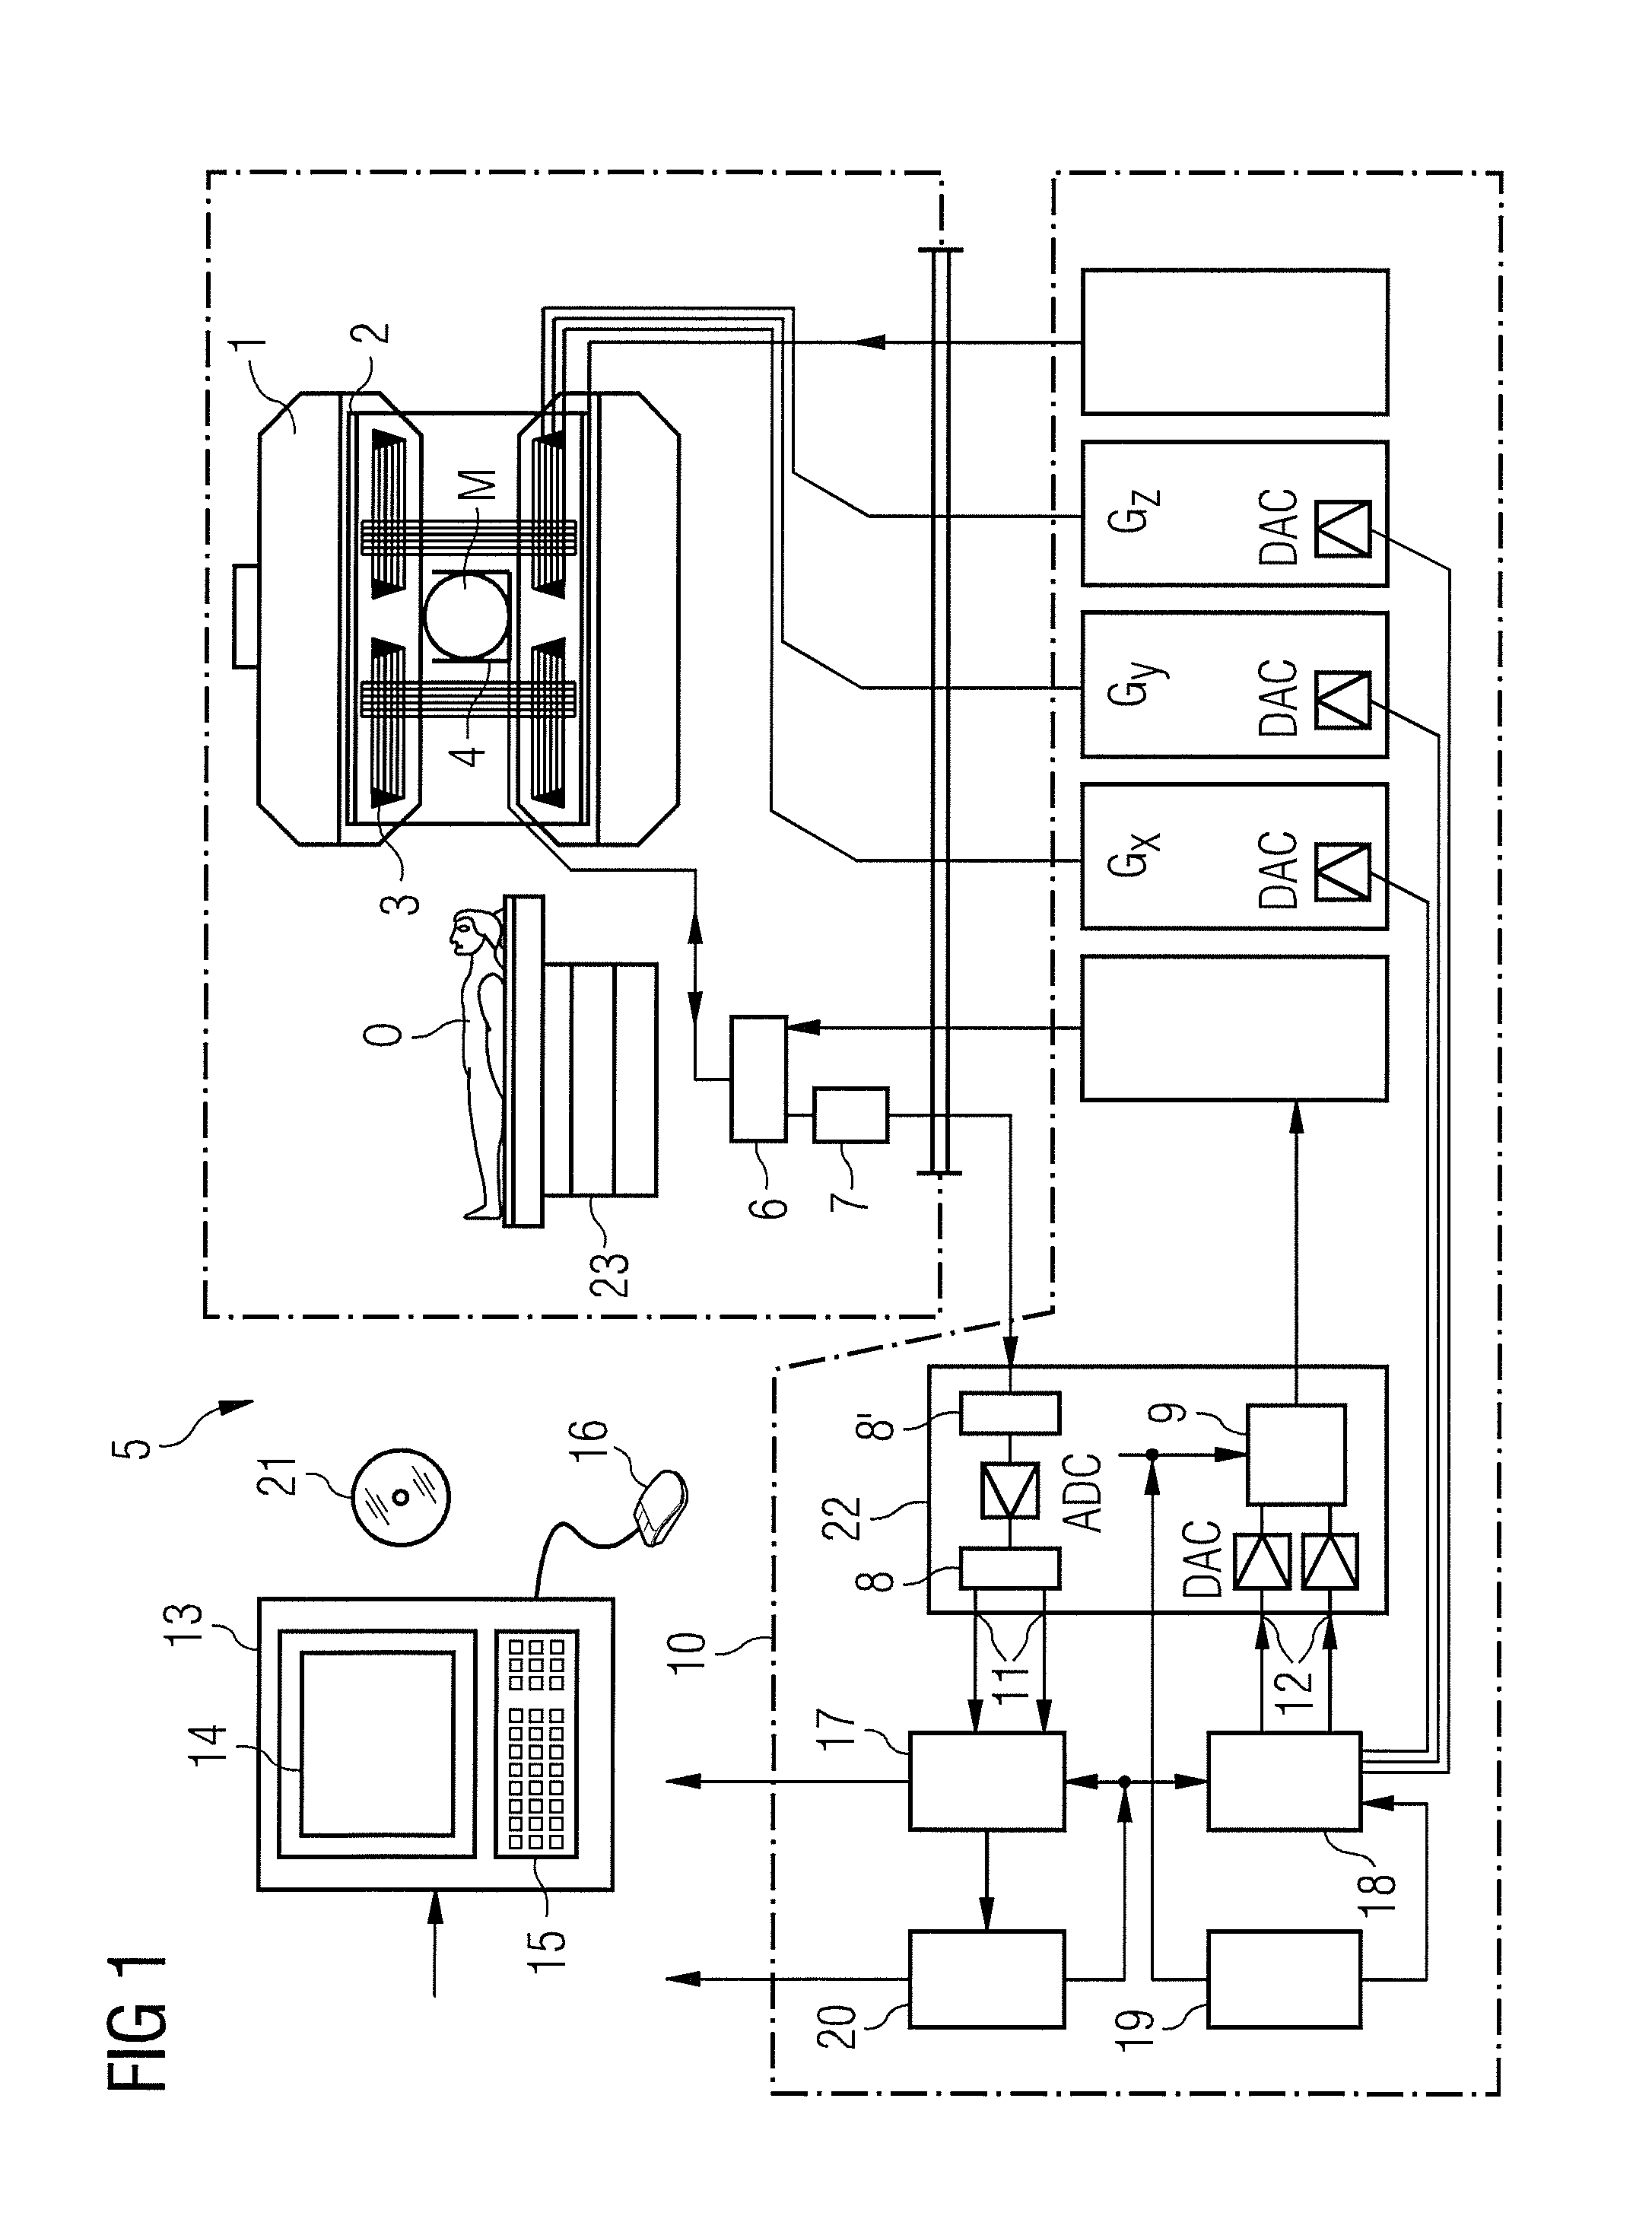 Magnetic resonance system and method to generate diffusion information